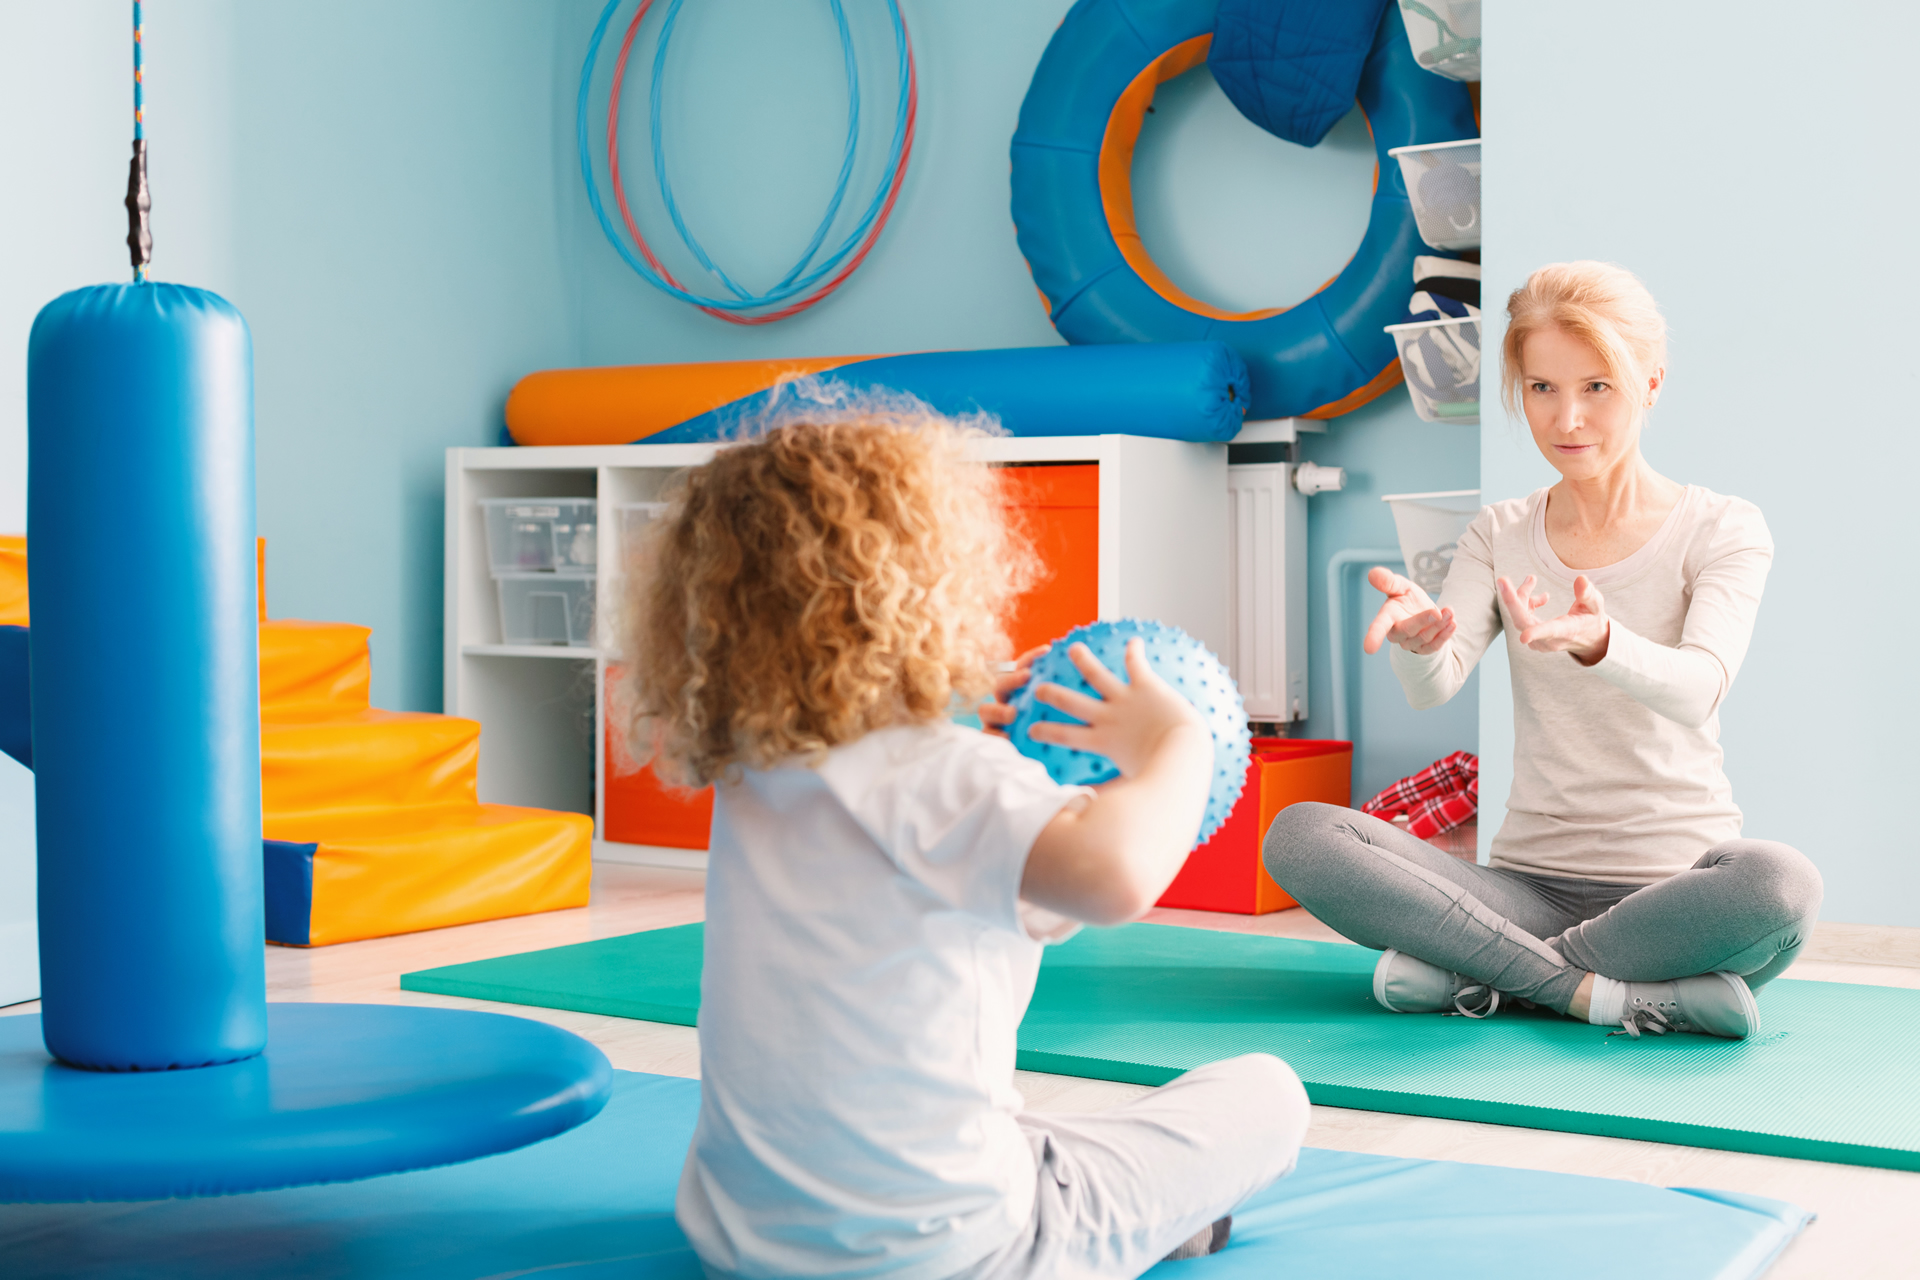 Let’s Communicate - Pediatric Therapy Services is a place for children to develop socially and cogni Let’s Communicate - Pediatric Therapy Services Winder (678)963-0694